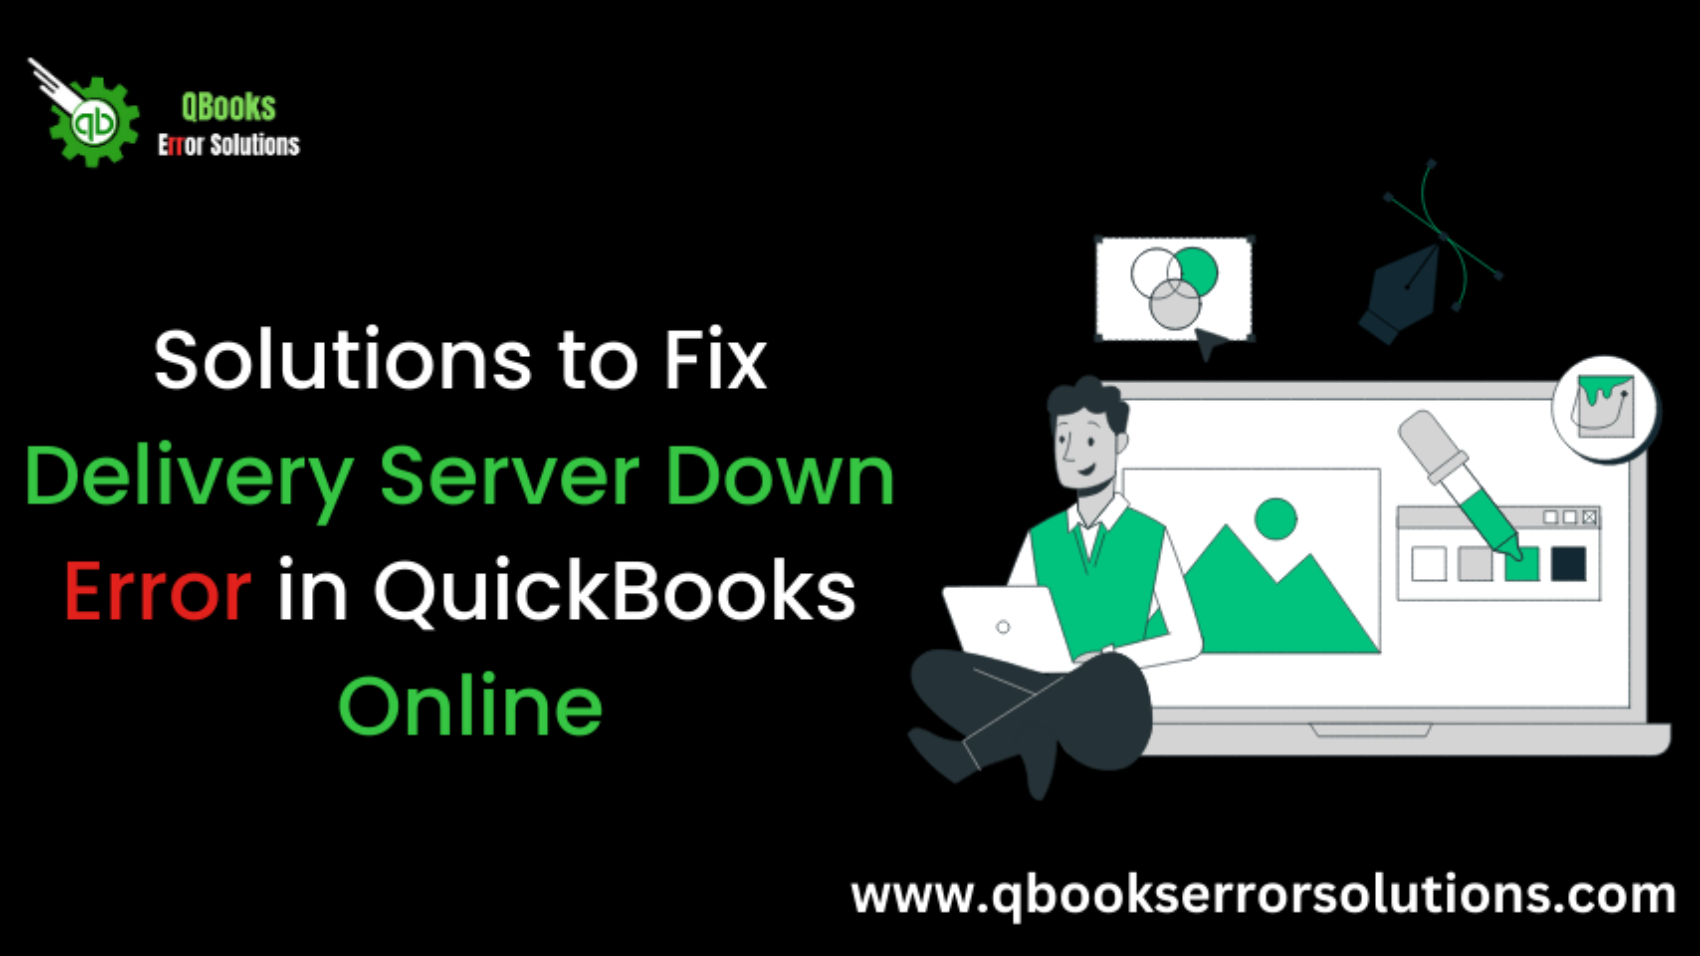 How to Resolve Delivery Server Down Error in QuickBooks Online